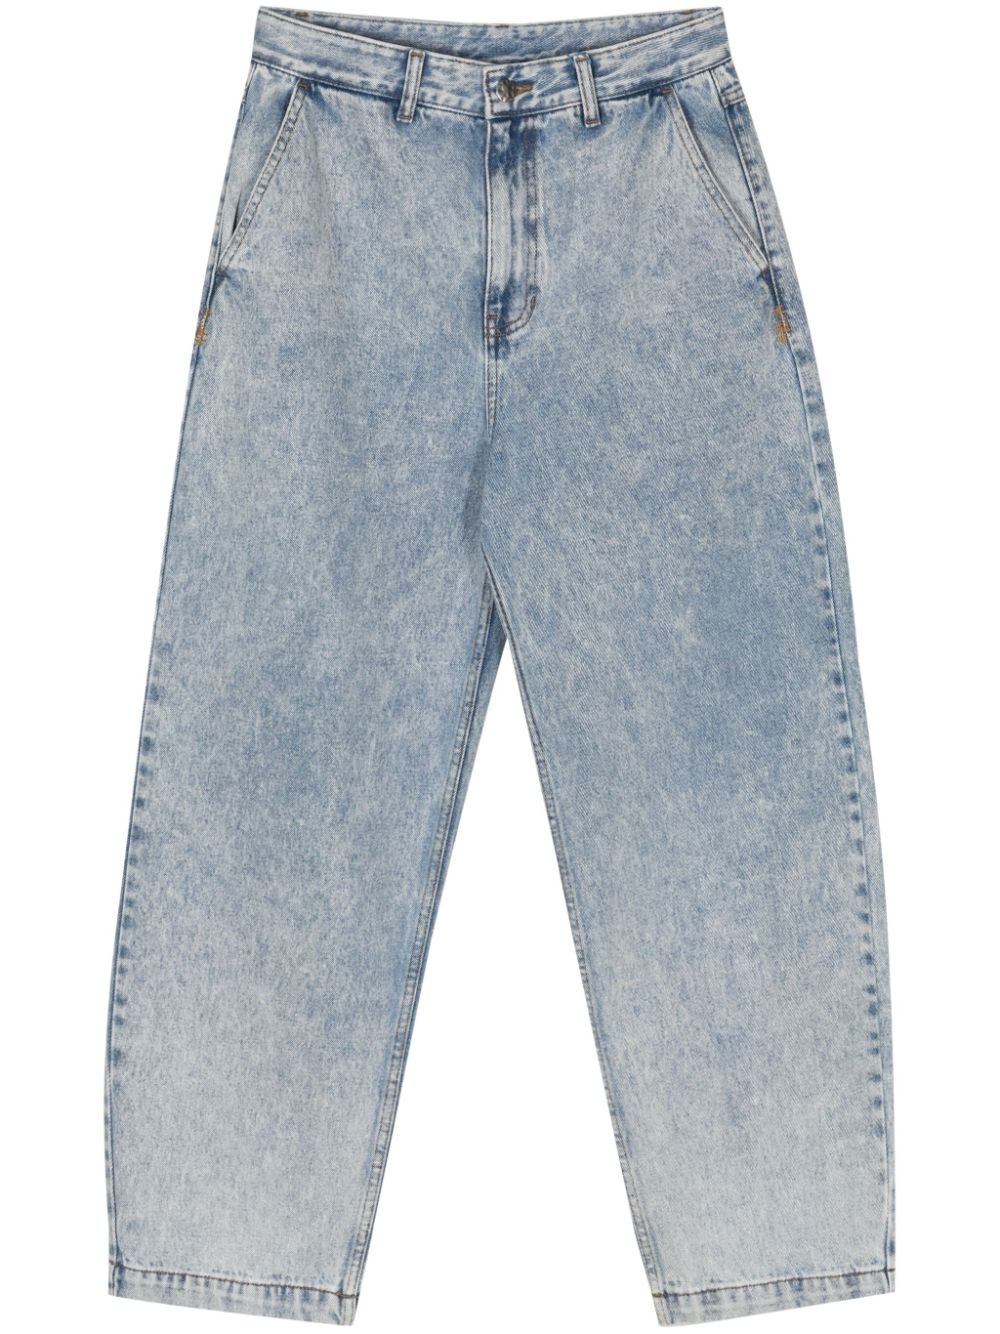 0103 mid-rise tapered jeans - 1